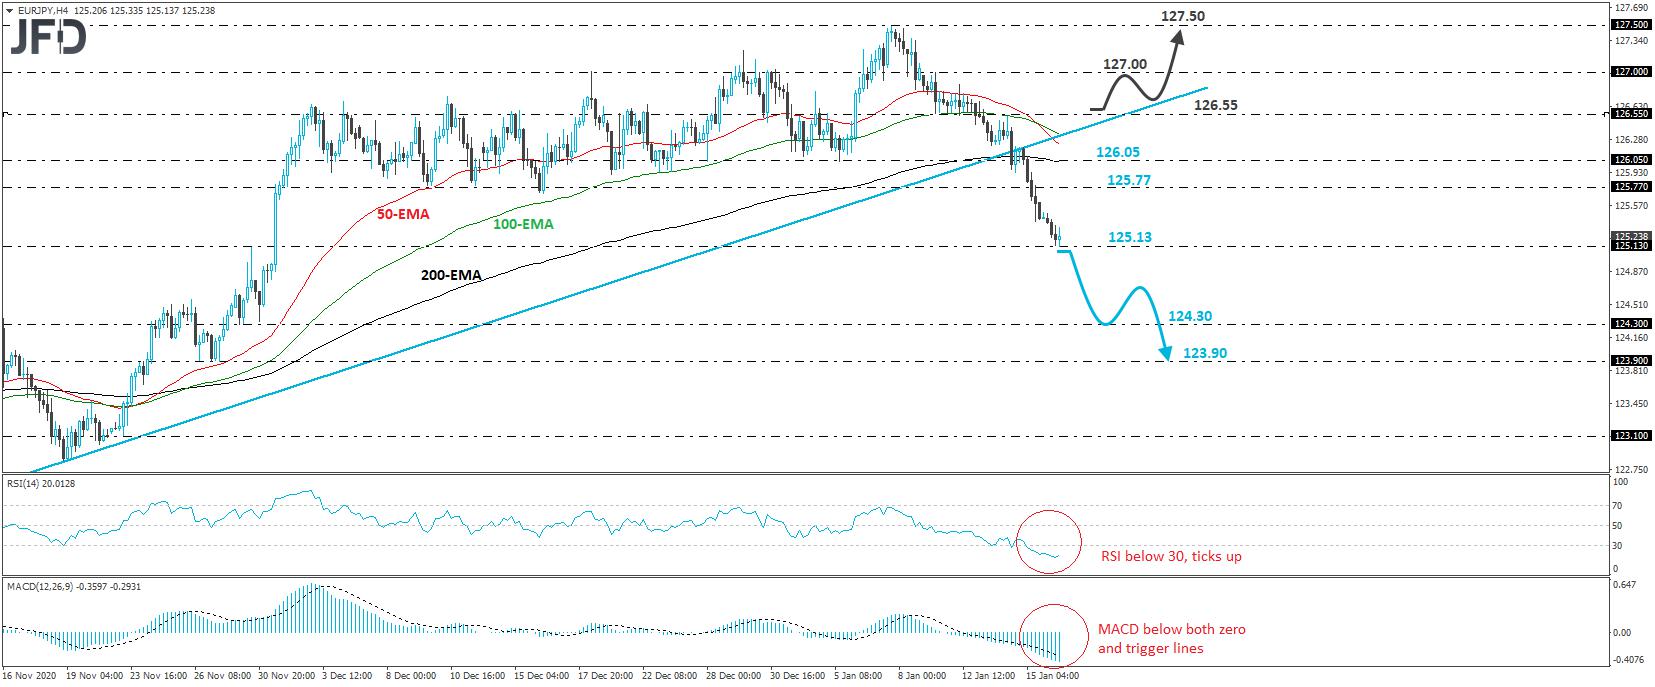 Will EUR/JPY continue falling?